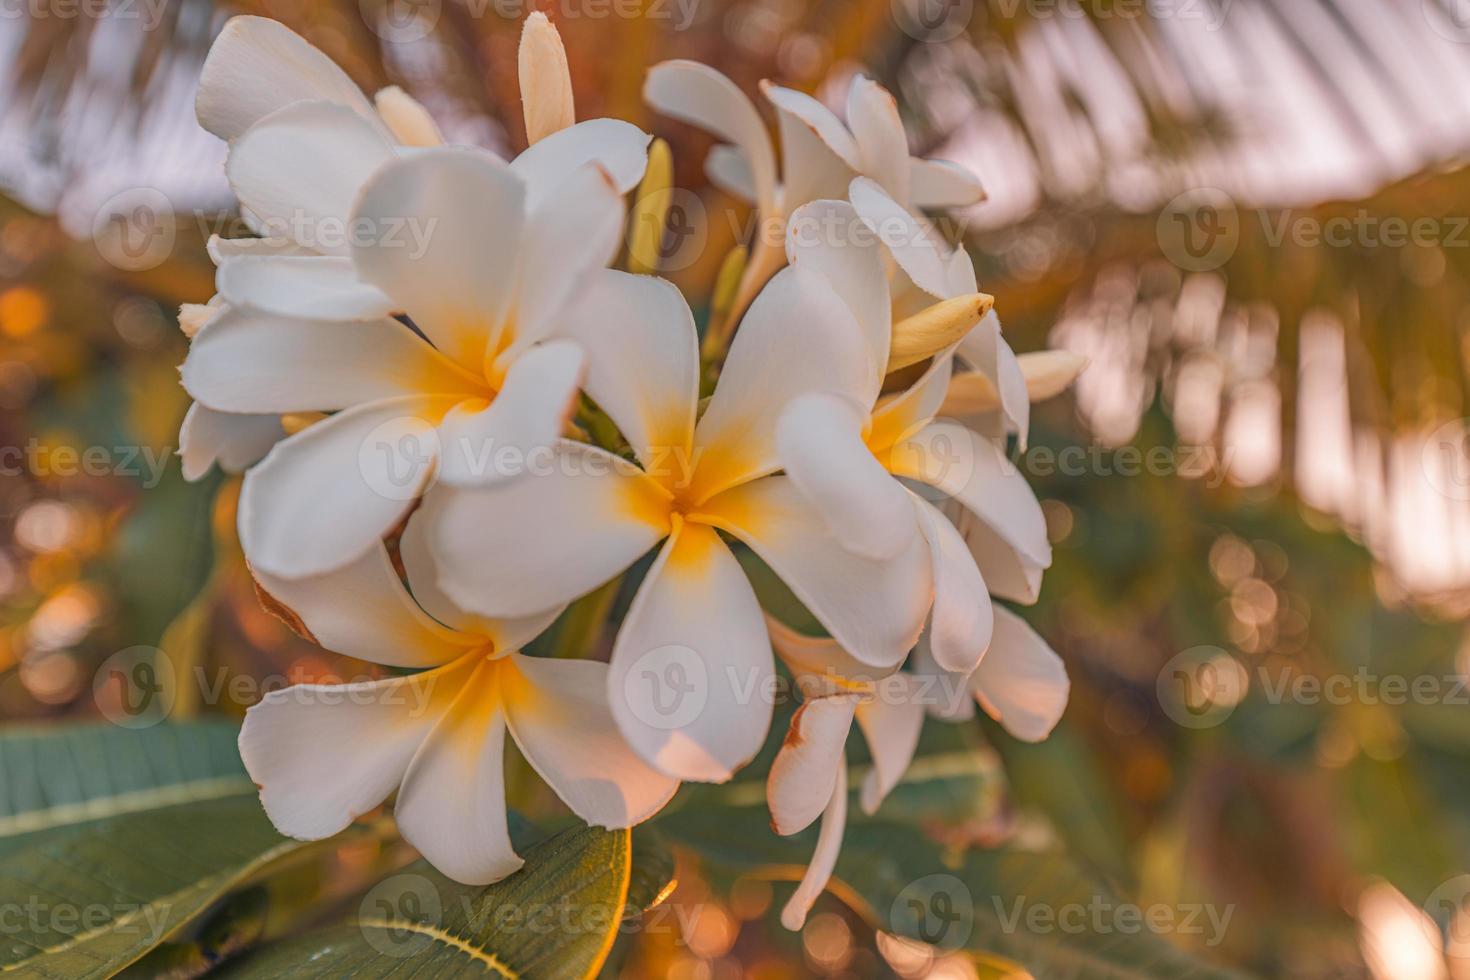 Closeup of beautiful plumeria frangipani floral natural background, artistic nature macro. Spring summer background, blurred bokeh foliage, colorful nature view. Exotic blooming flowers, tropic photo